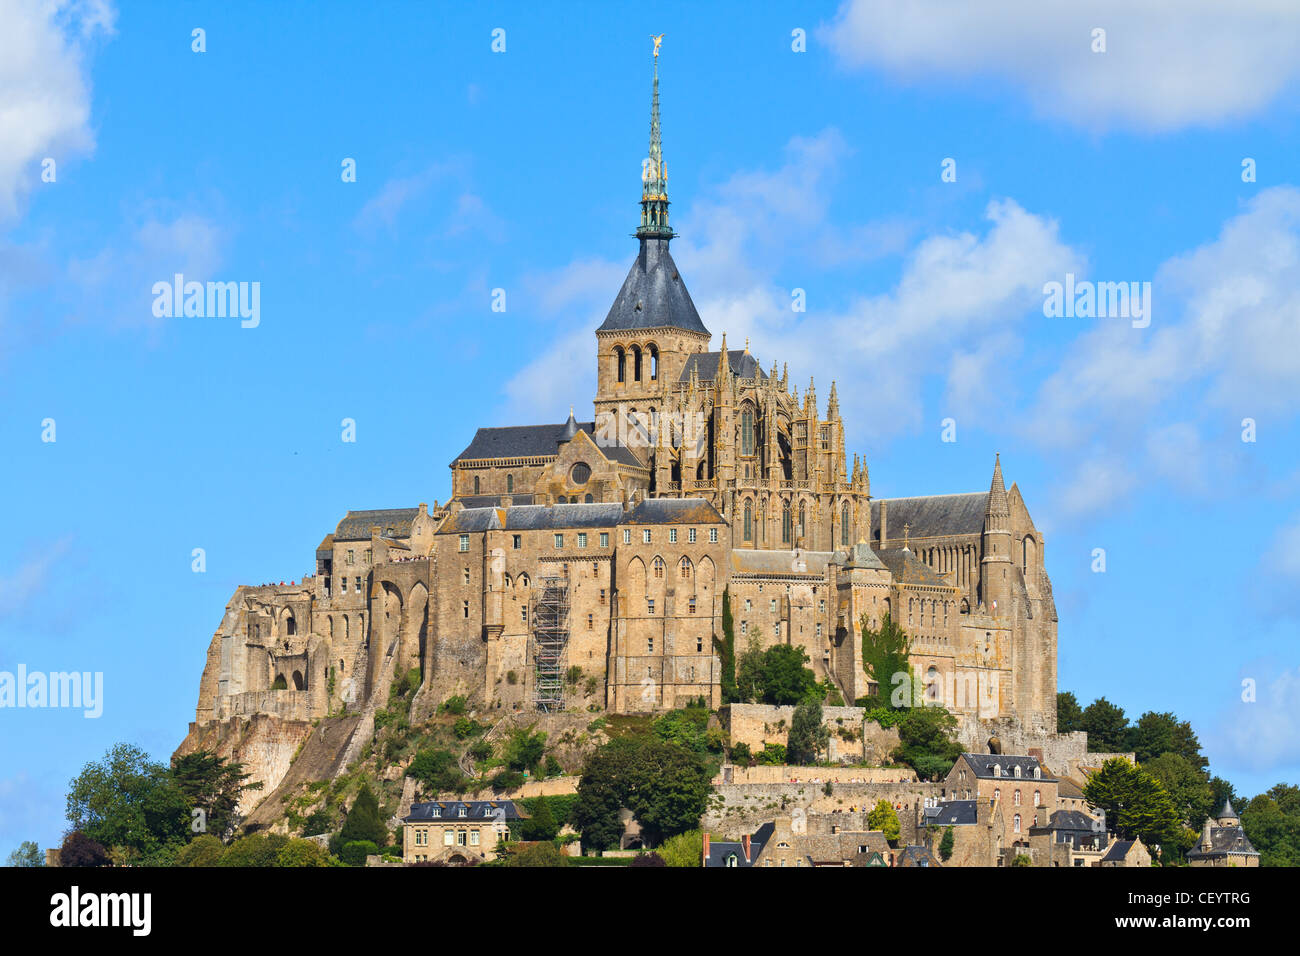 Mont Saint Michel Abbey, Normandy / Brittany, France Stock Photo